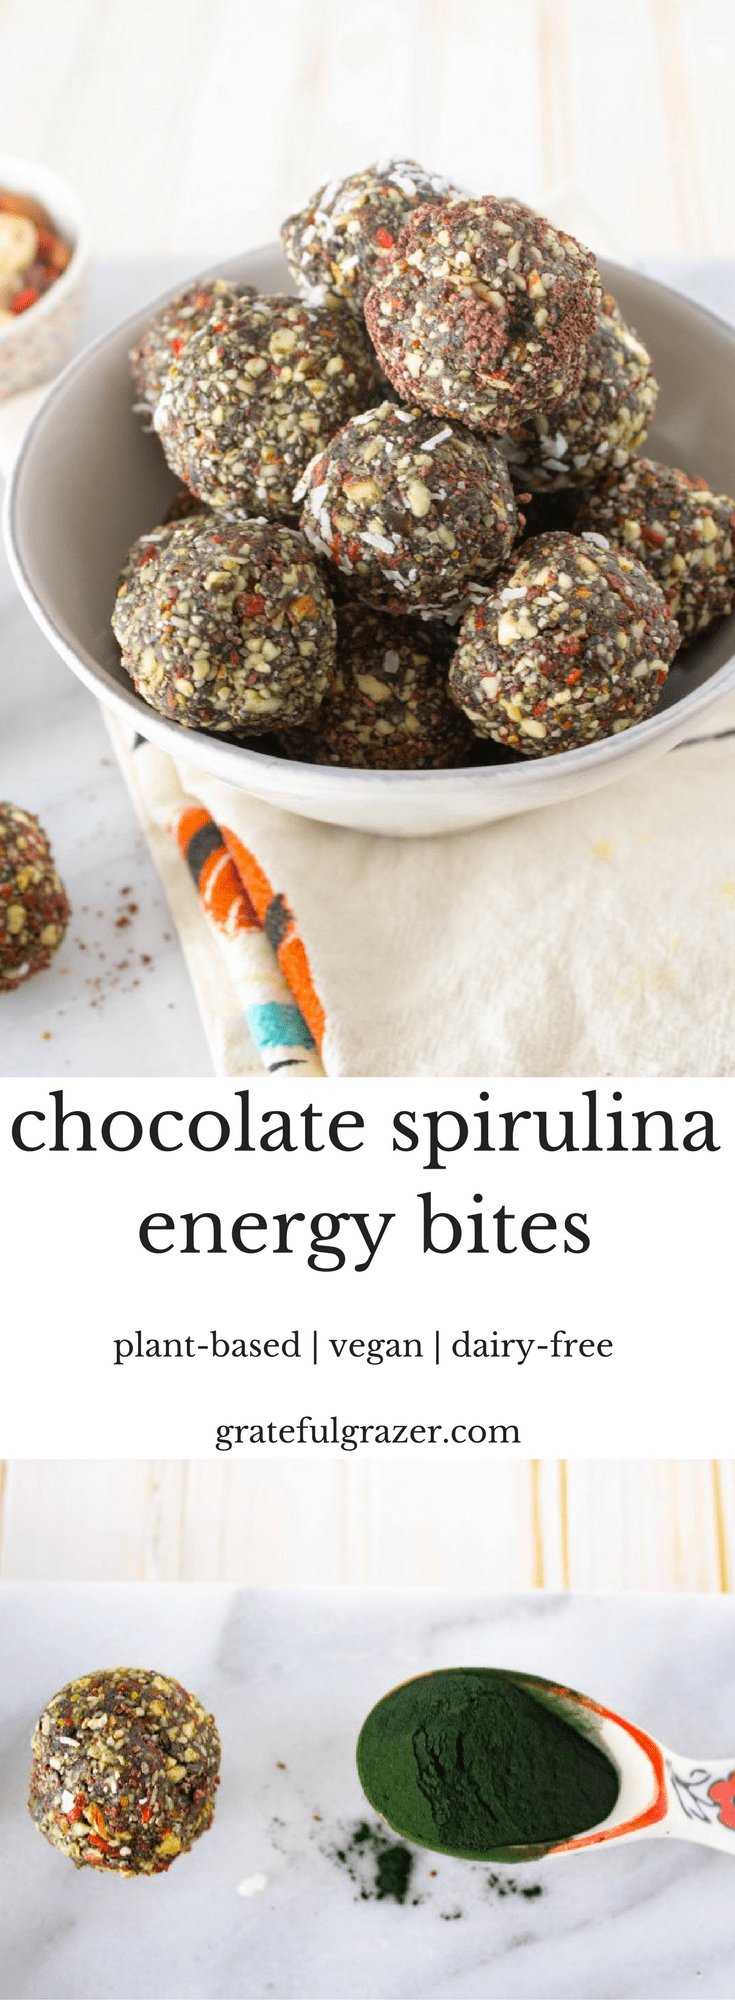 These Spirulina Superfood Bites are the perfect snack for the spirulina novice. With plant-based protein, fiber, and healthy fats, these bites make a great pre- or post- workout snack.